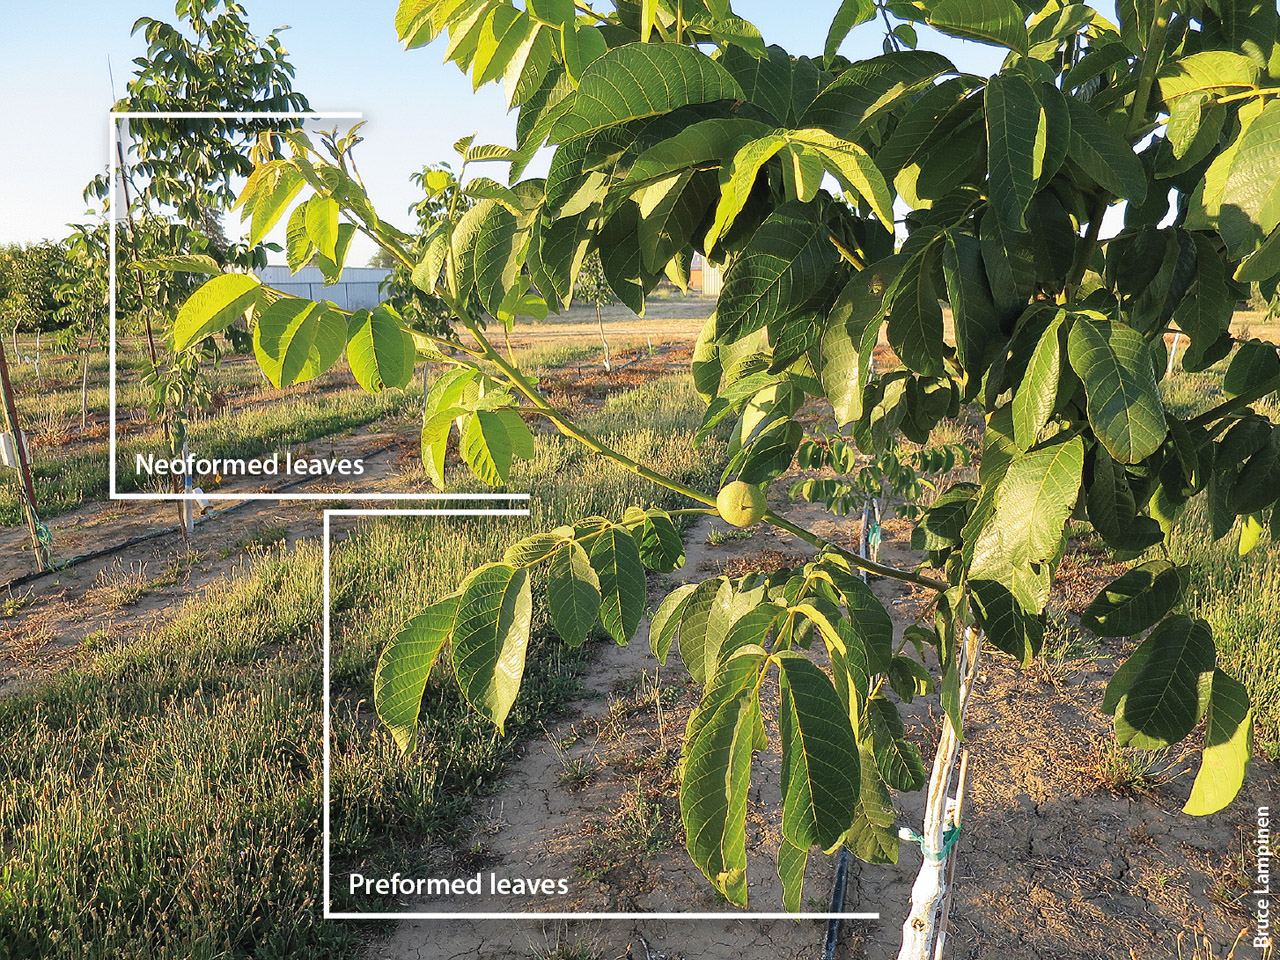 California Agriculture journal, April - June 2015, Volume 69 number 2. Water: New approaches to aquifer recharge. Research article: Howard walnut trees can be brought into bearing without annual pruning